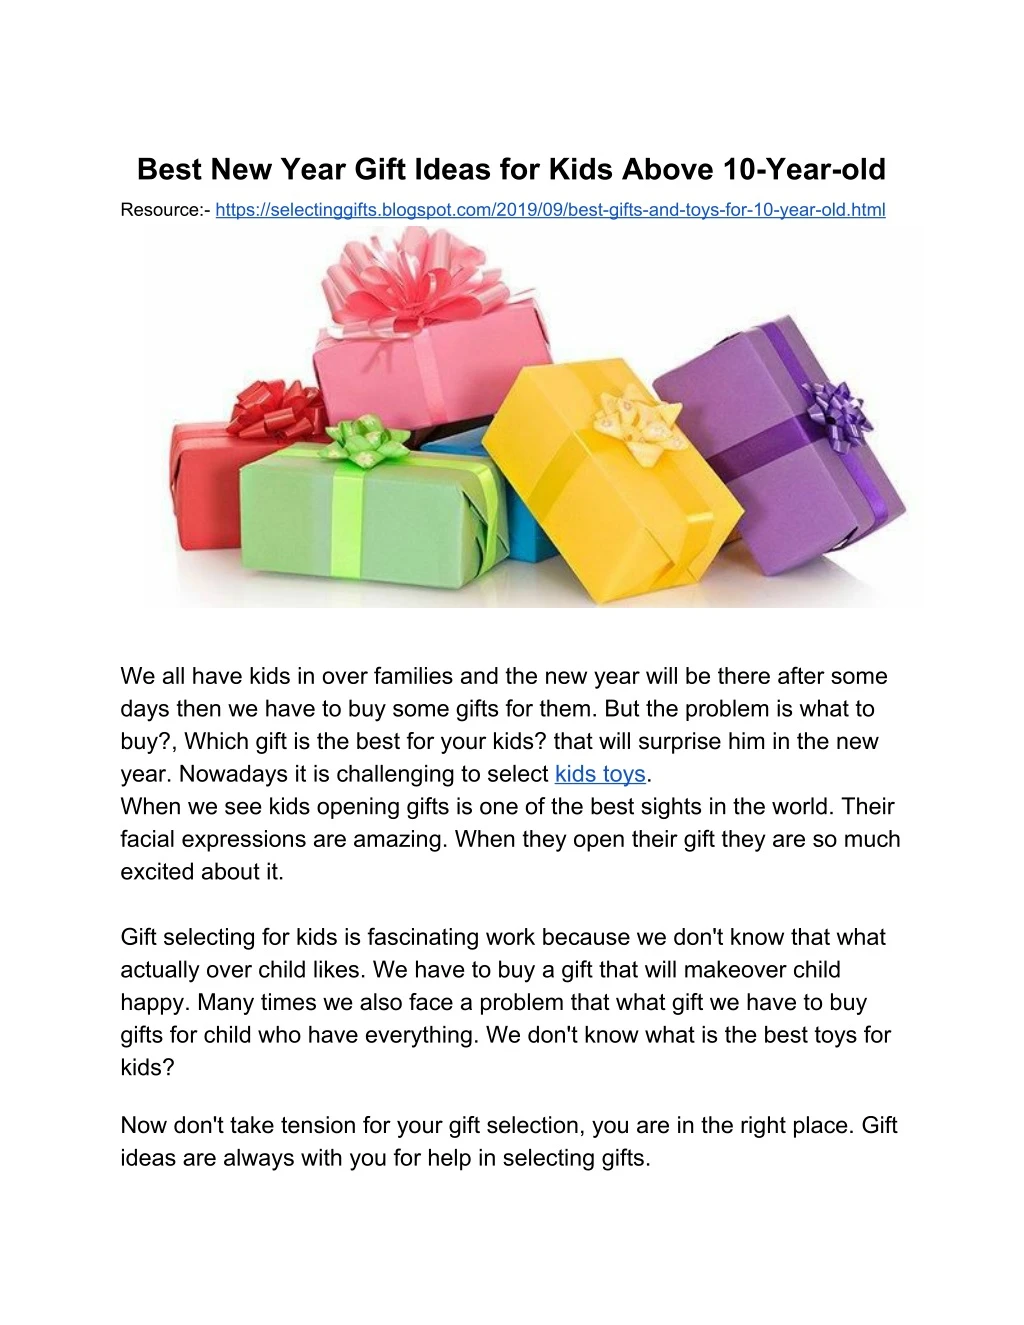 best new year gift ideas for kids above 10 year